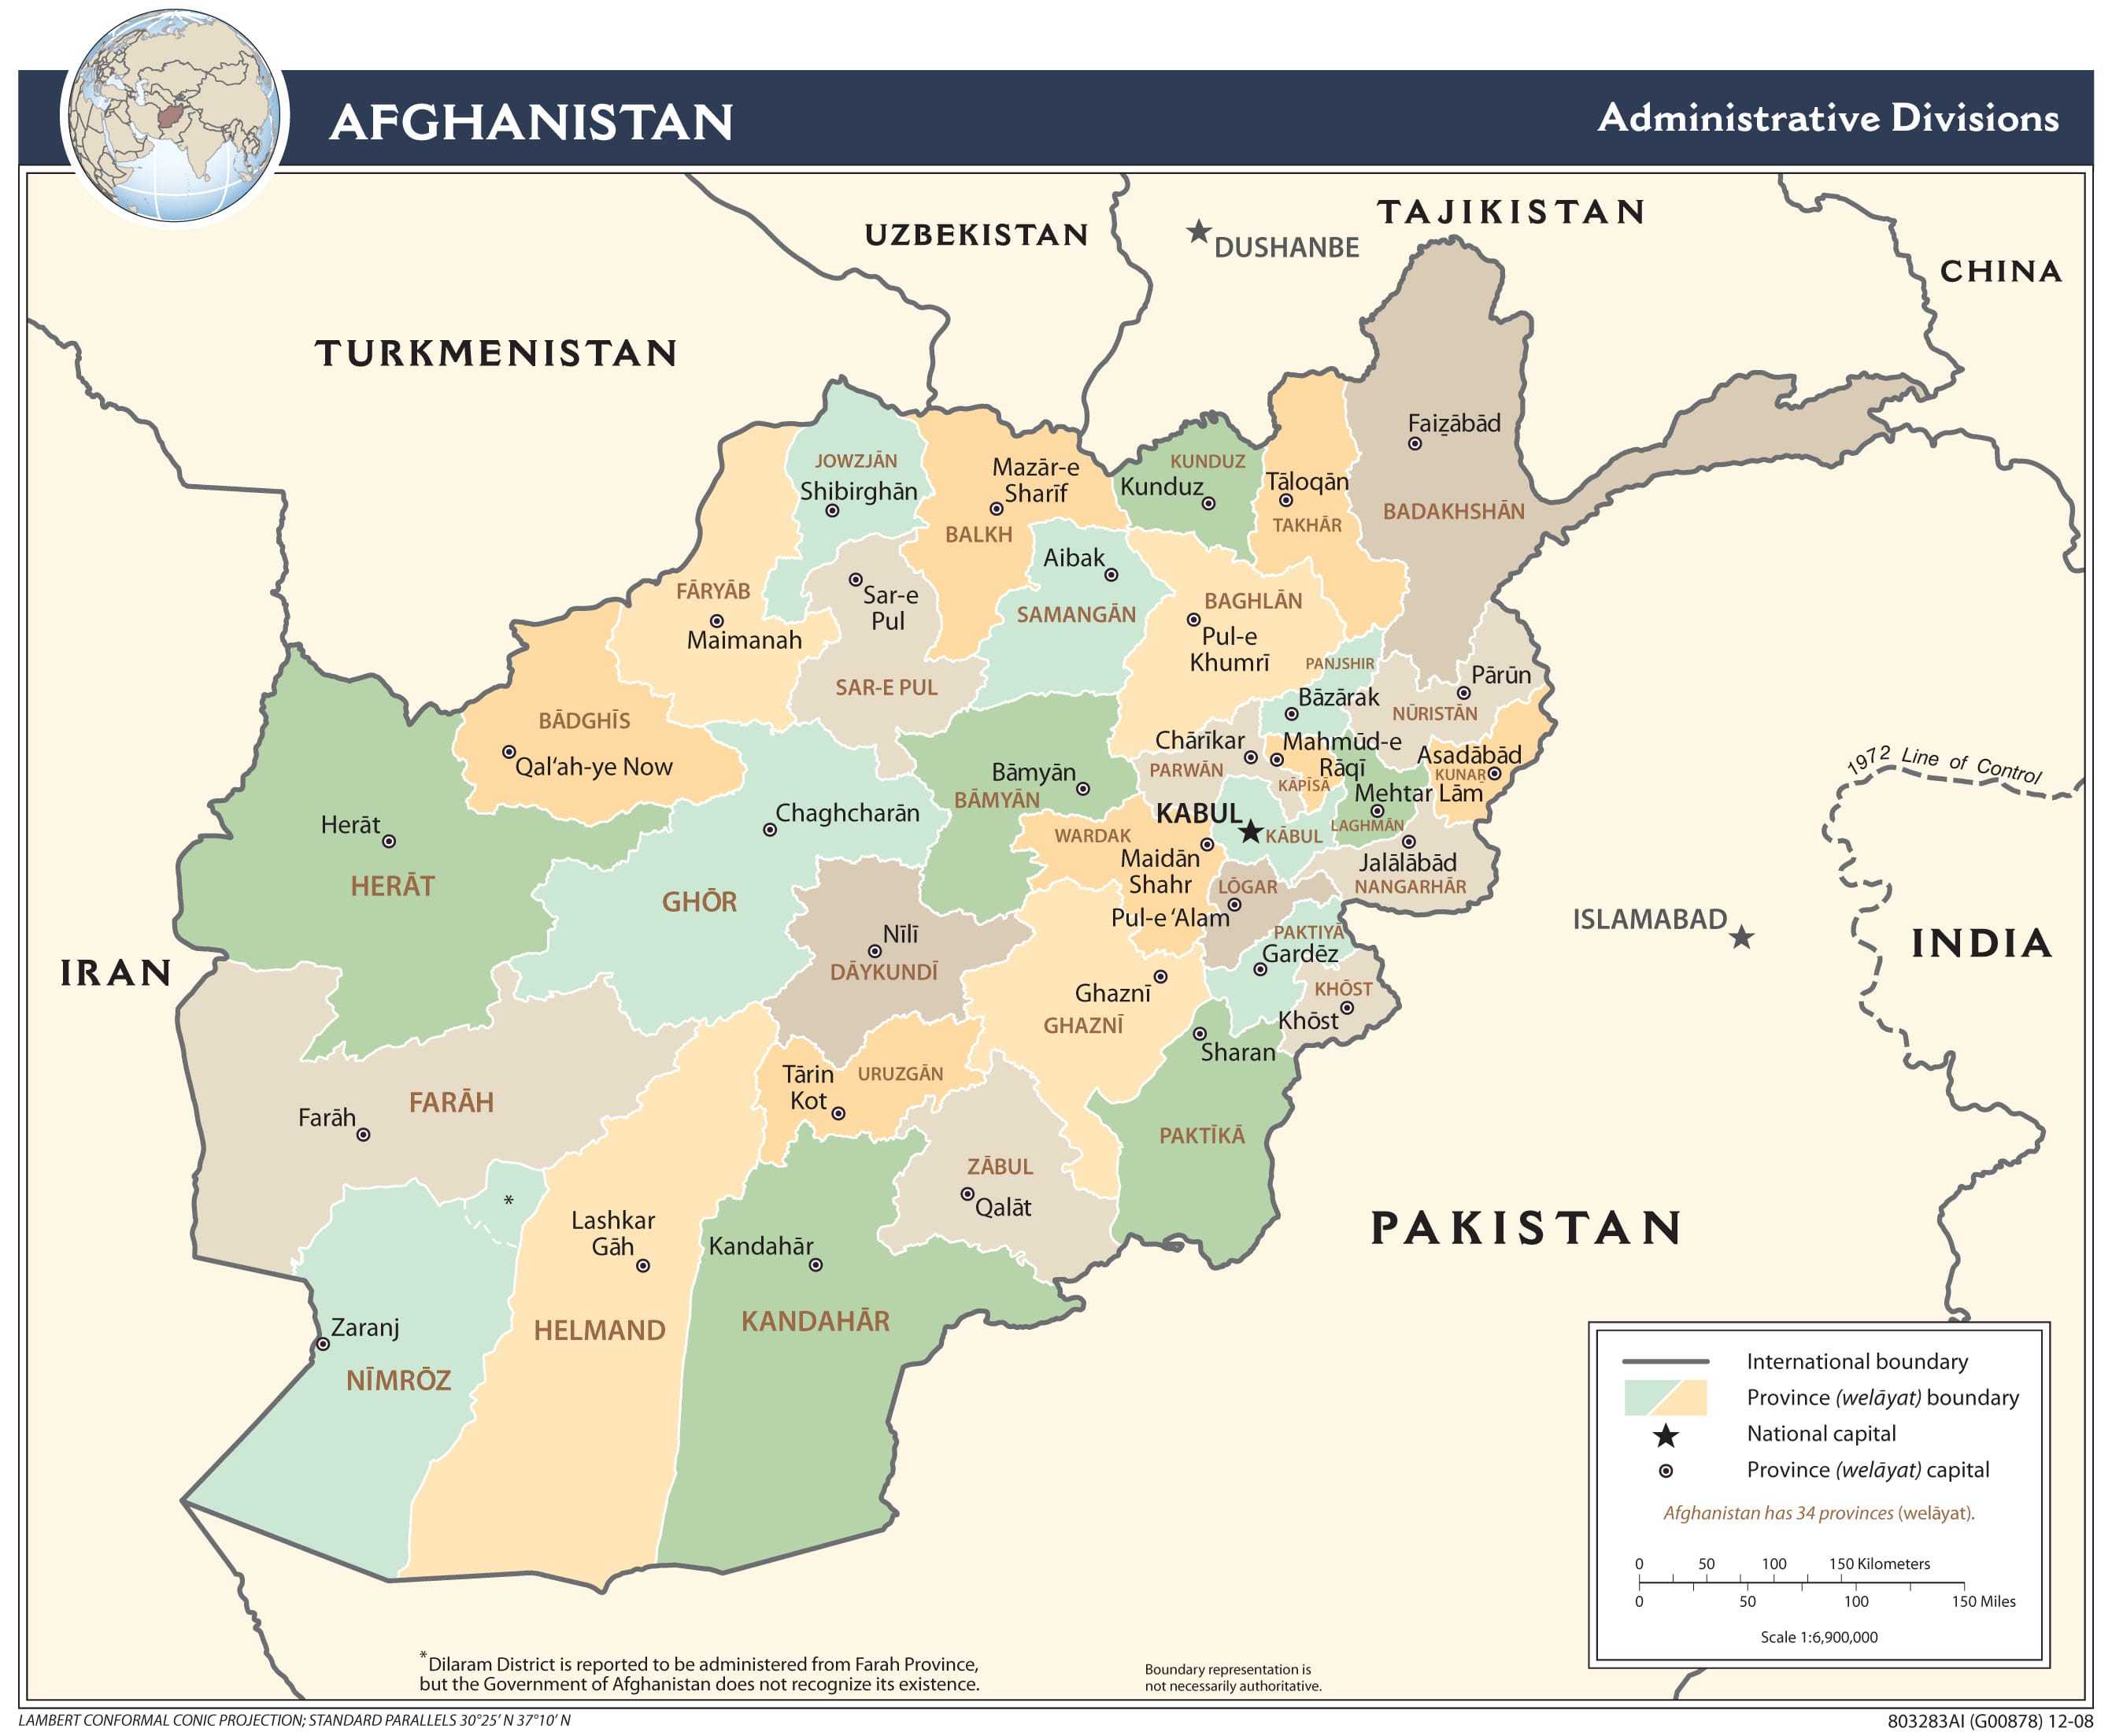 Administrative map of Afghanistan.